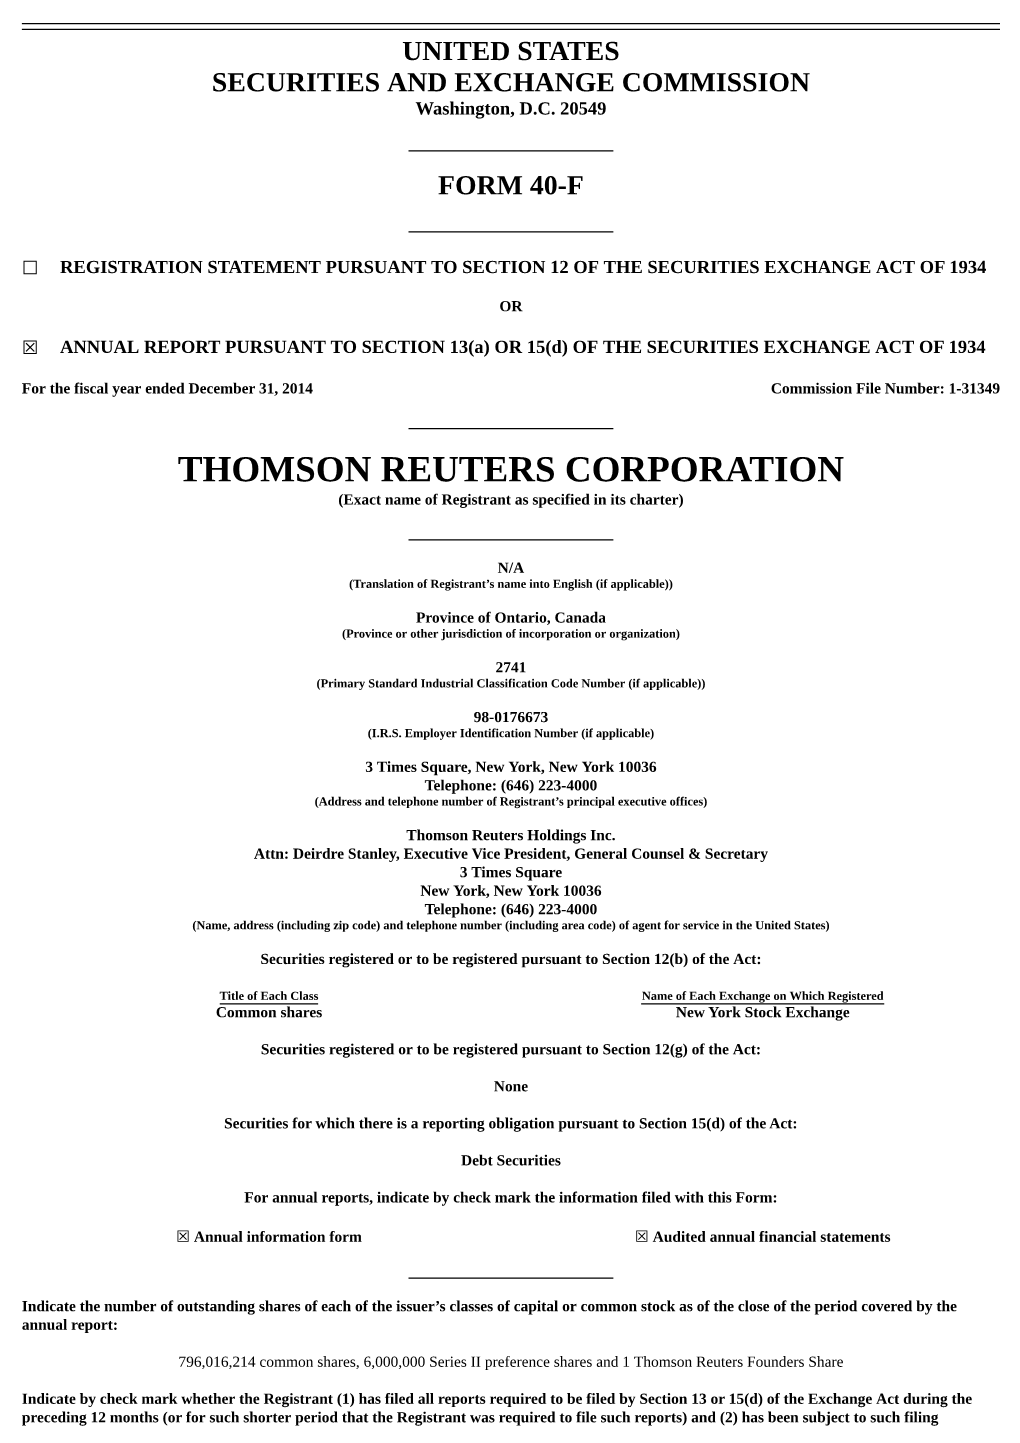 THOMSON REUTERS CORPORATION (Exact Name of Registrant As Specified in Its Charter)